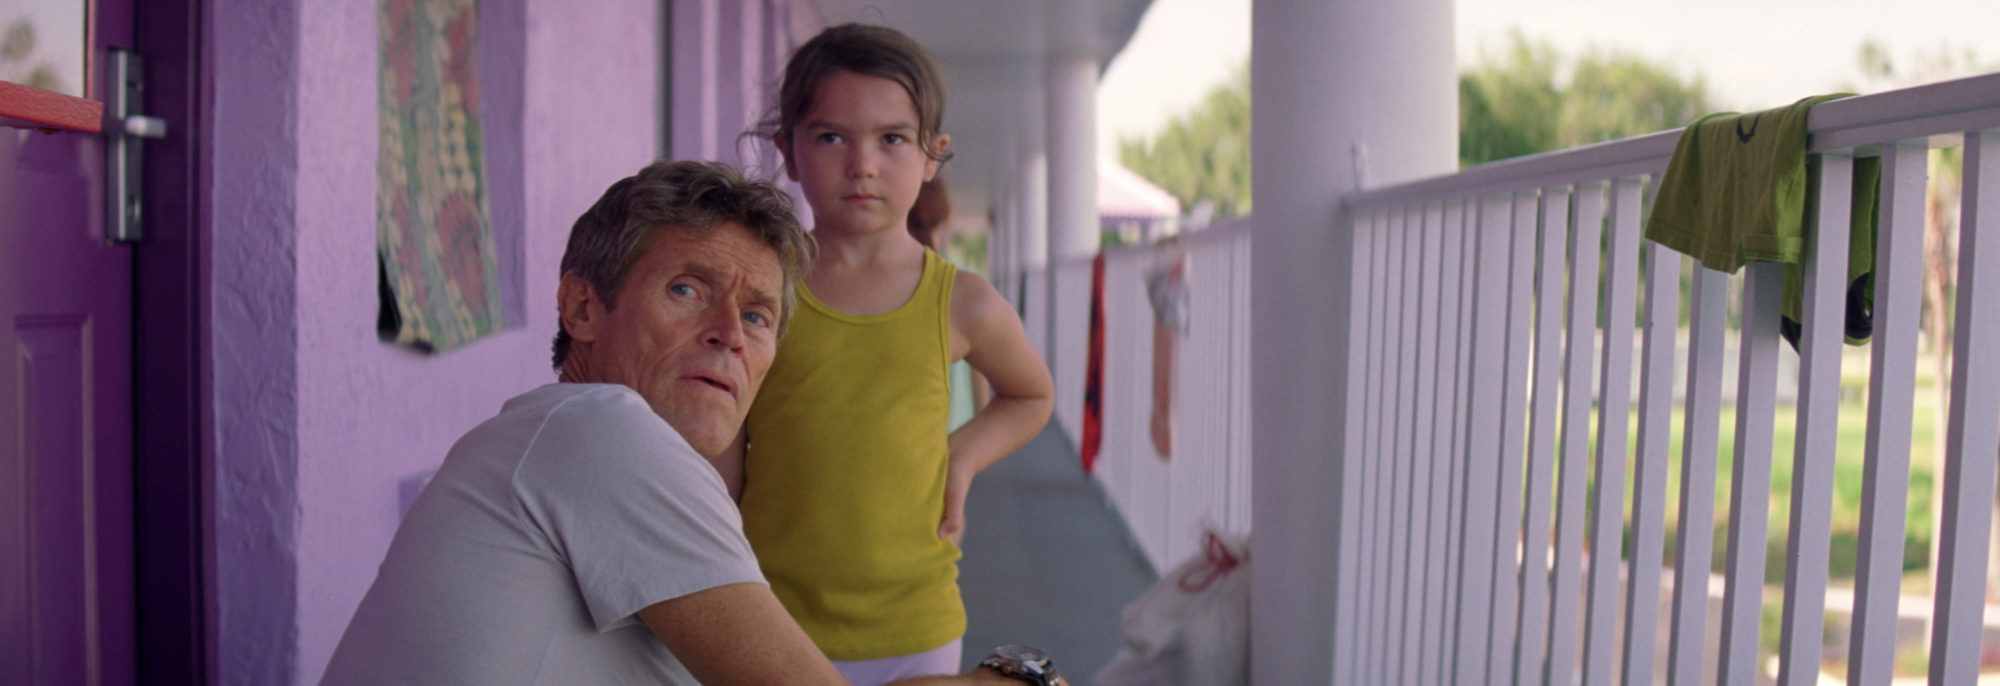 The florida project, willem dafoe